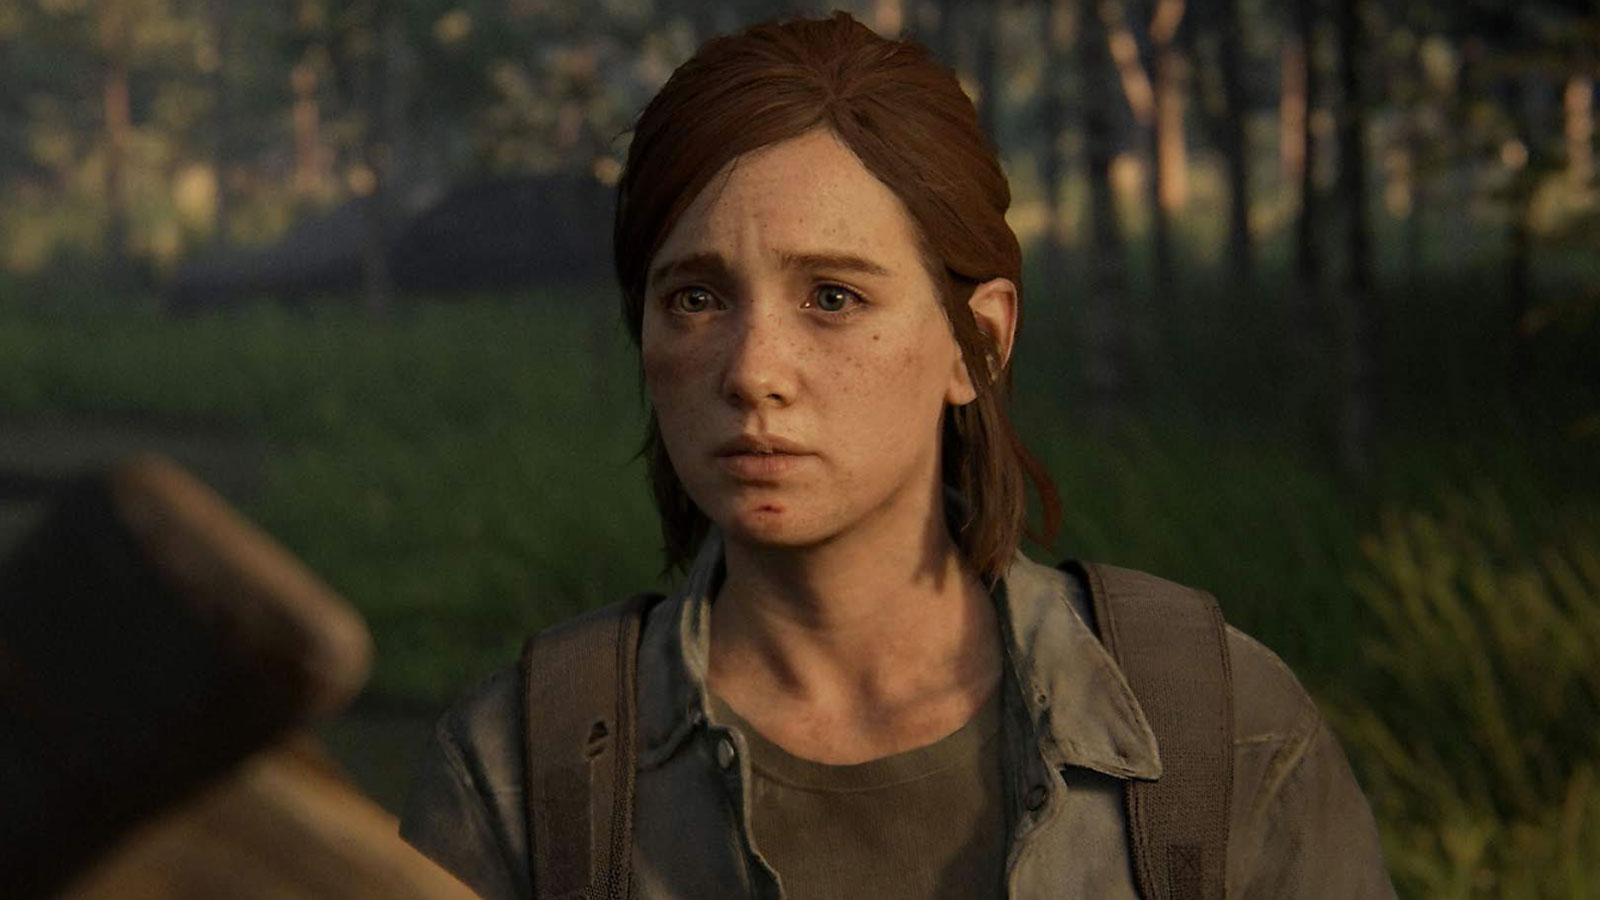 Neil Druckmann of Naughty Dog refused to comment on The Last of Us